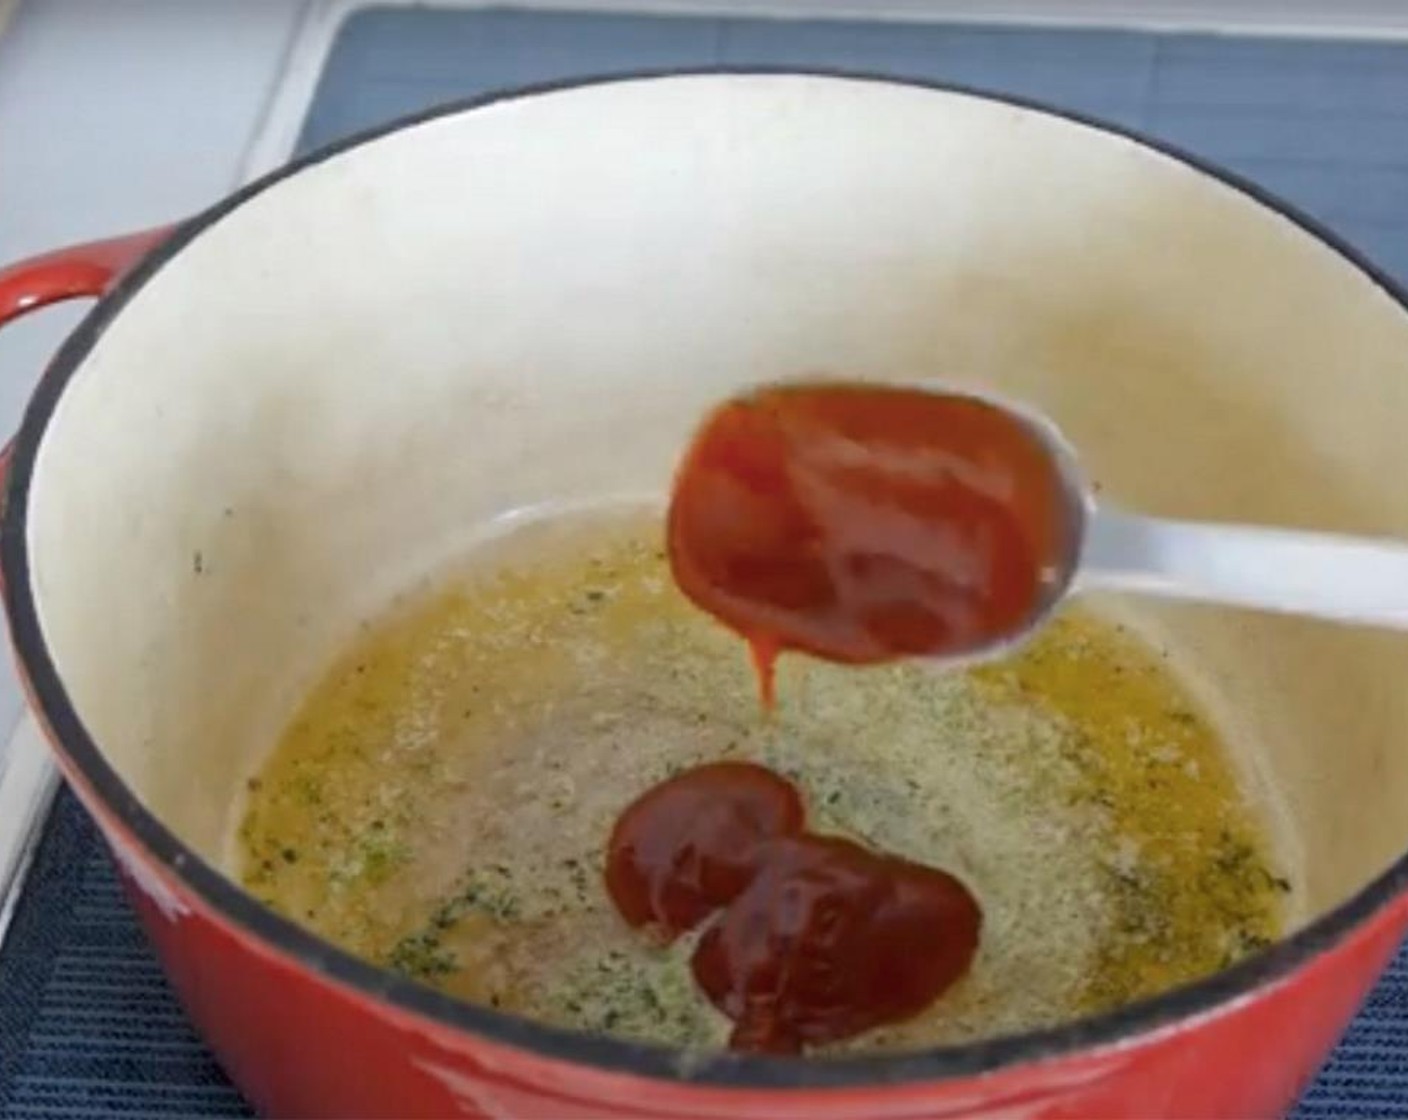 step 2 Melt Butter (1 Tbsp) in a pot. Once the butter has melted, add the rosemary and Sriracha (1 Tbsp) and mix.